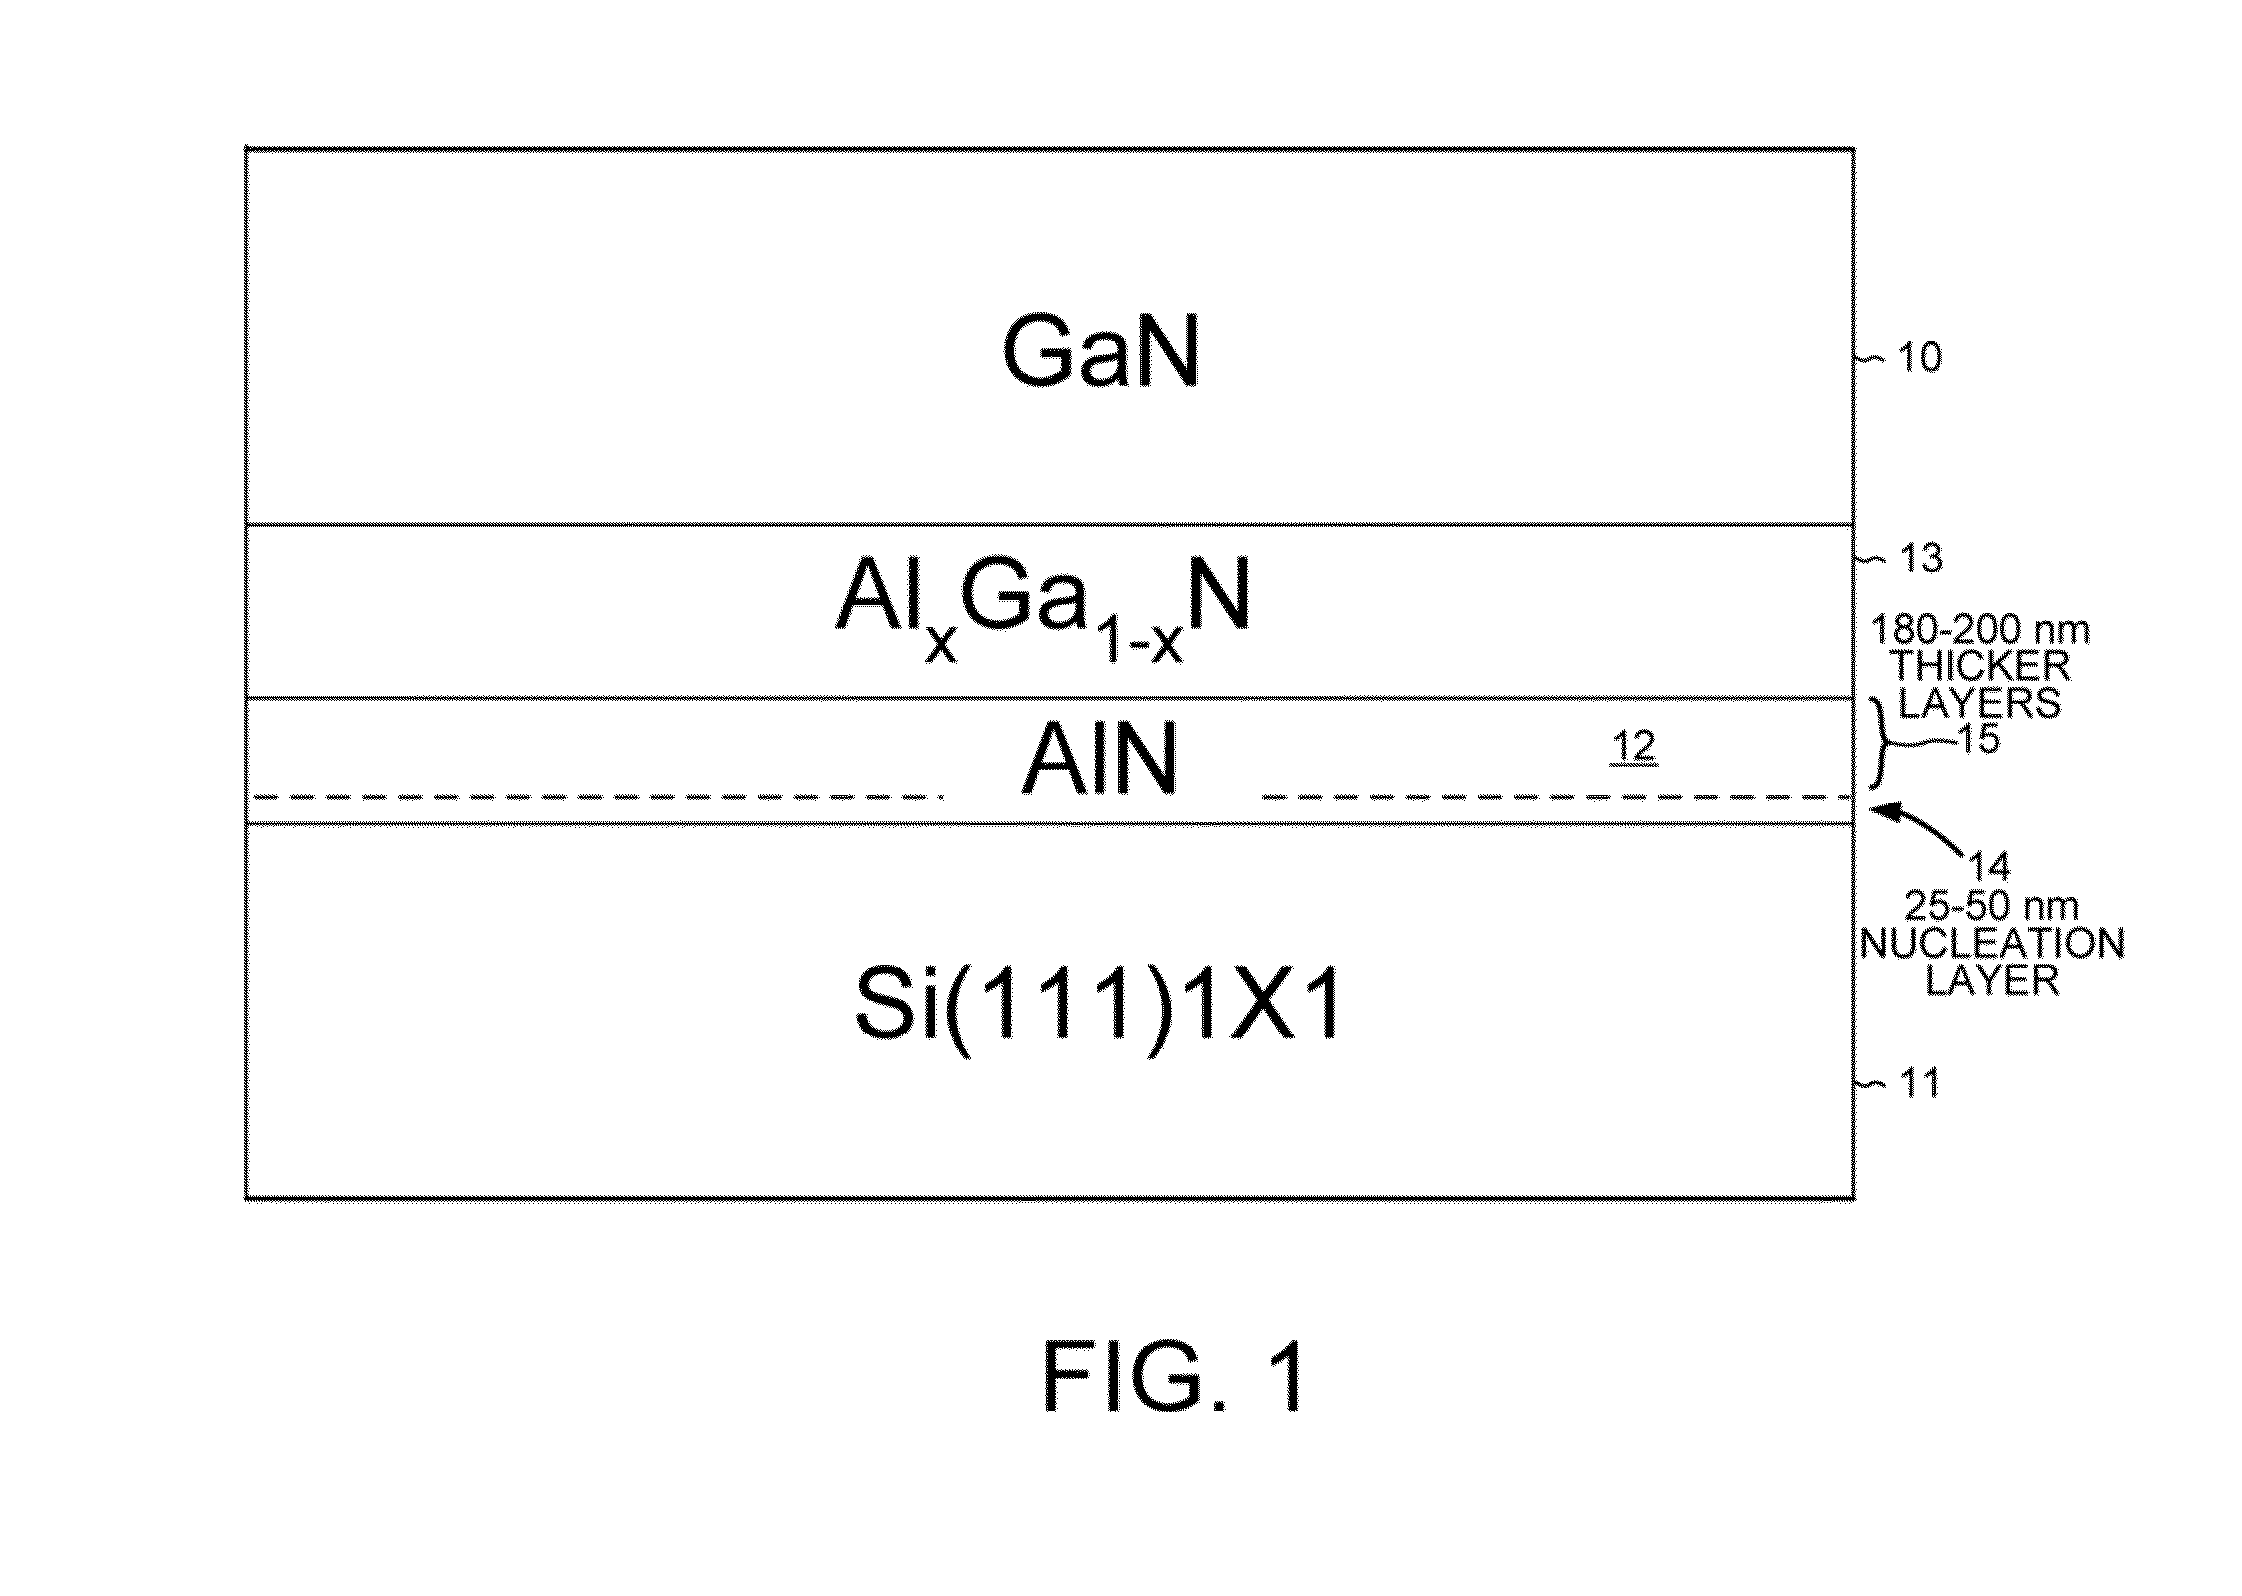 Nucleation of Aluminum Nitride on a Silicon Substrate Using an Ammonia Preflow